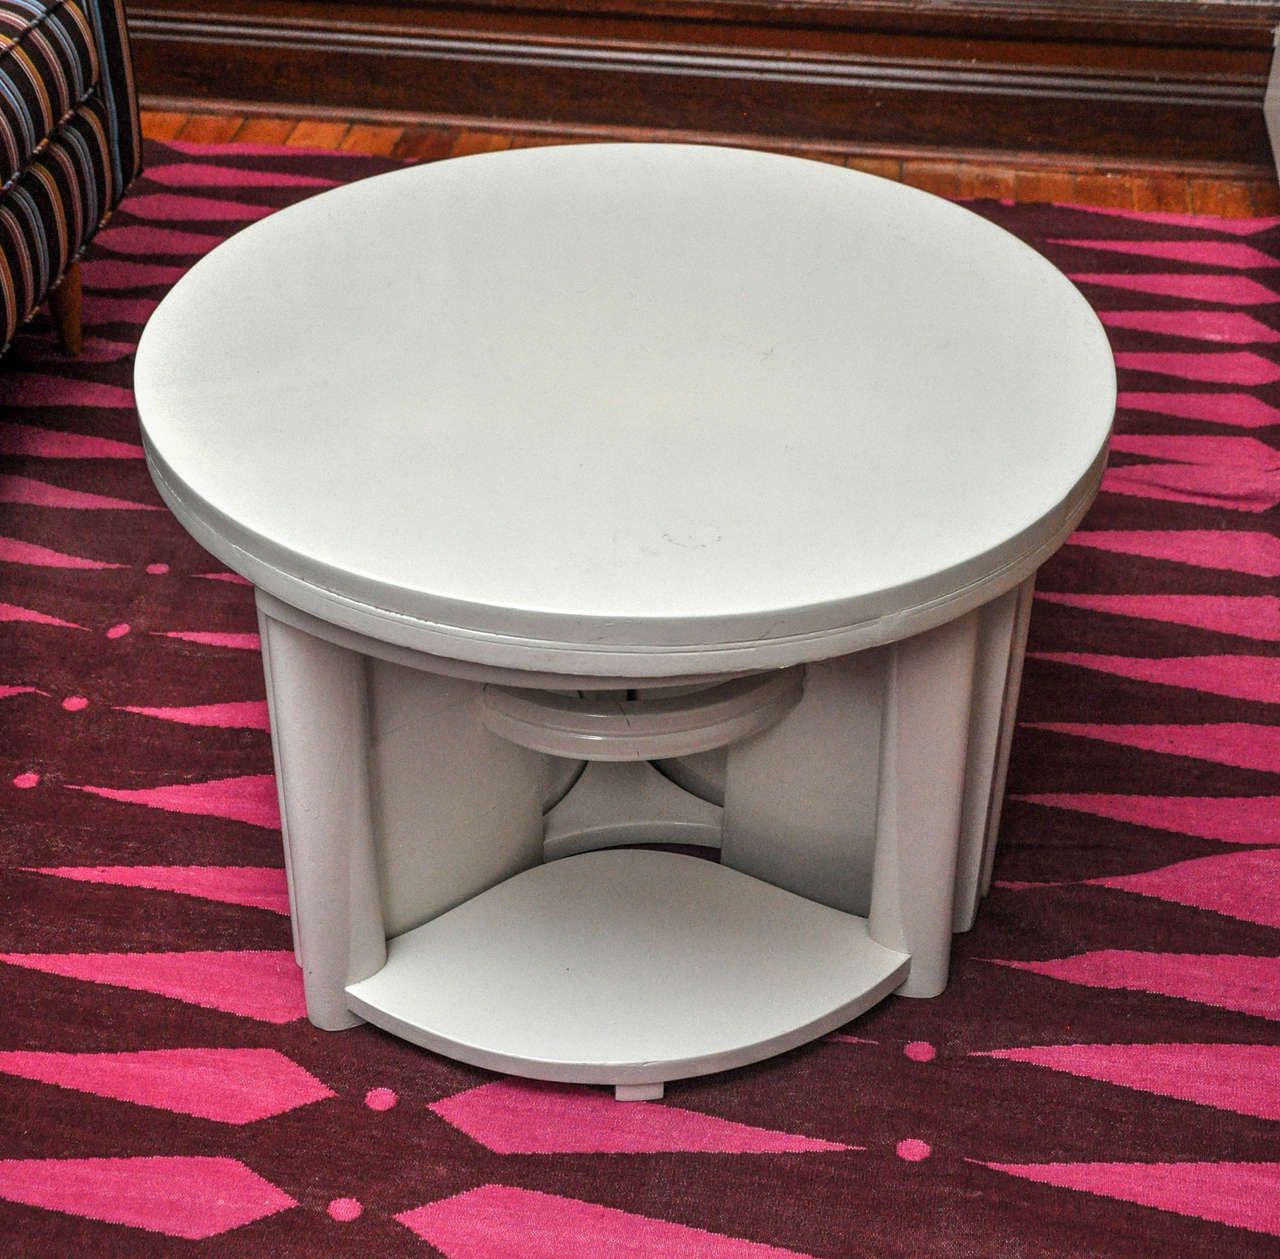 Dramatic presence and shape with unique trio of stools that can be stored inconspicuously underneath and used for extra seating